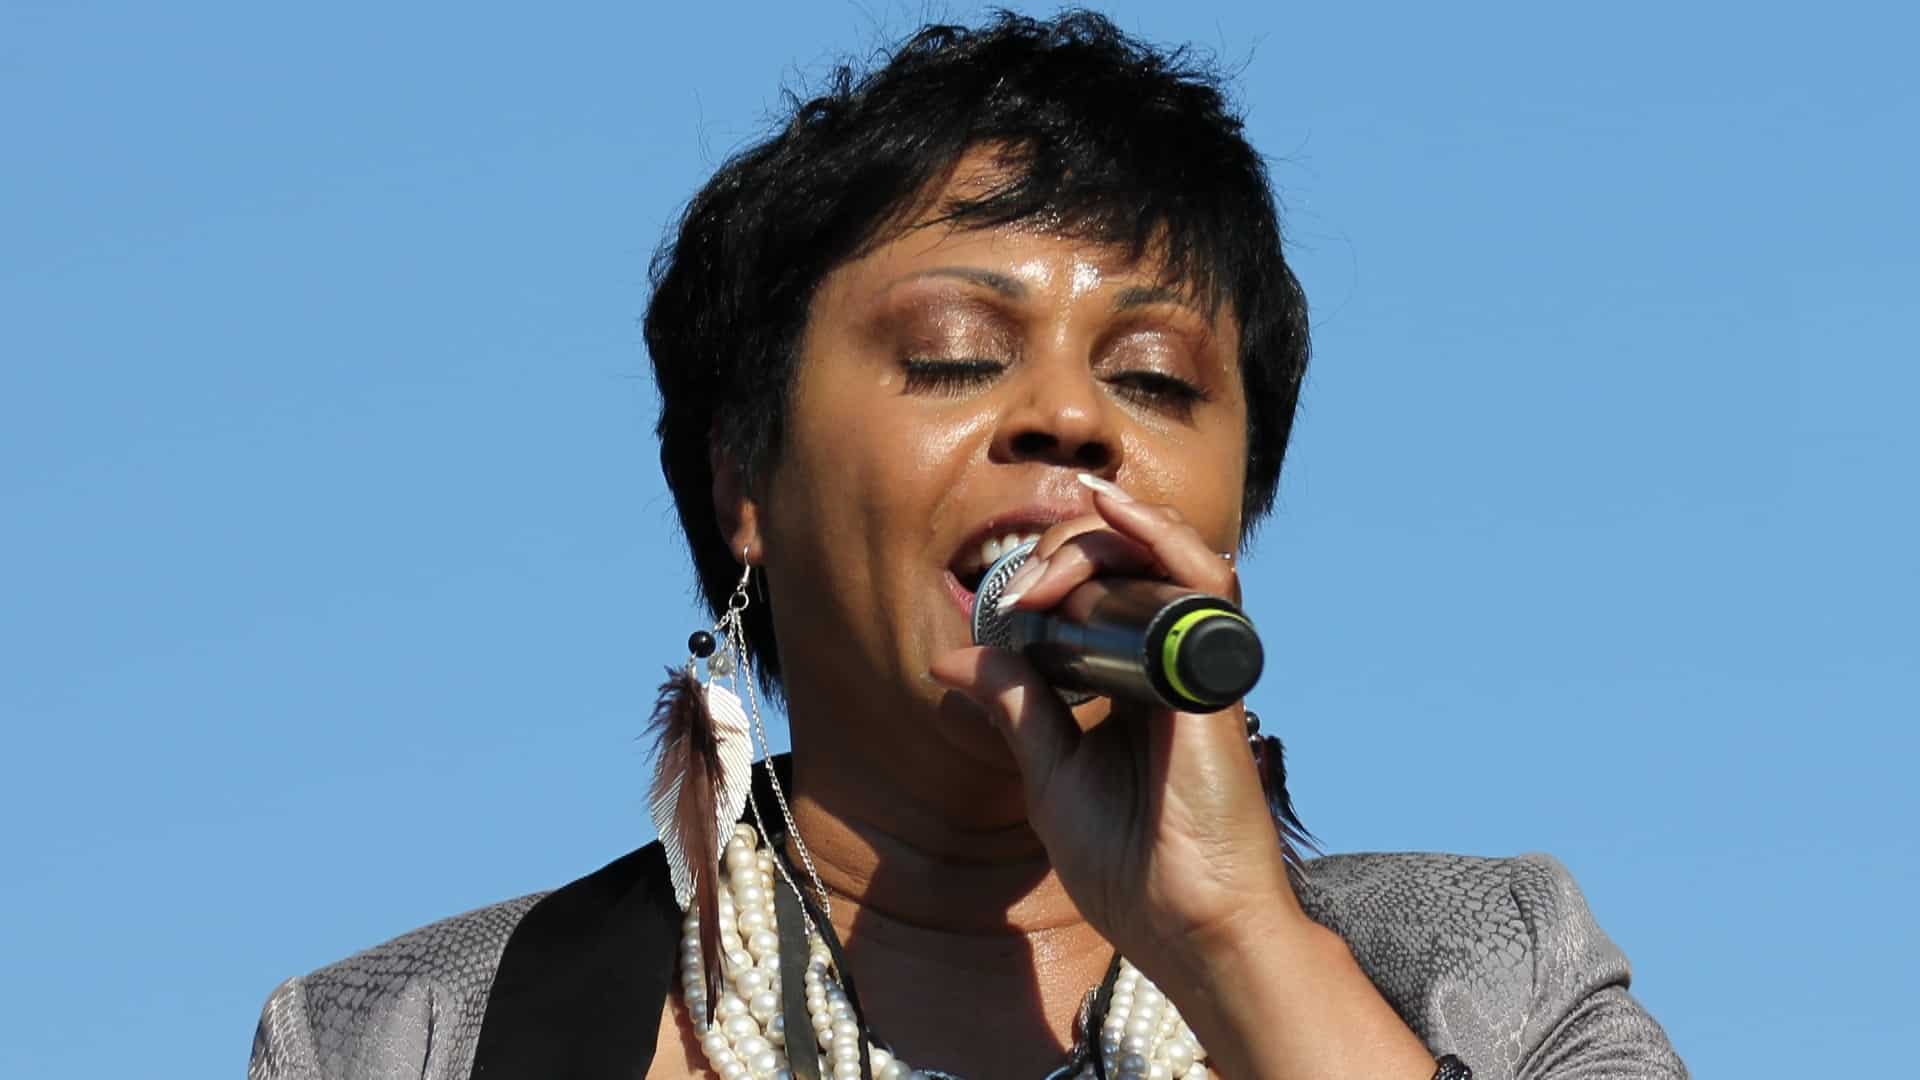 Crystal Waters' 90's hit ‘Gypsy Woman’ climbs Beatport Top 100 nearly 33 years after release